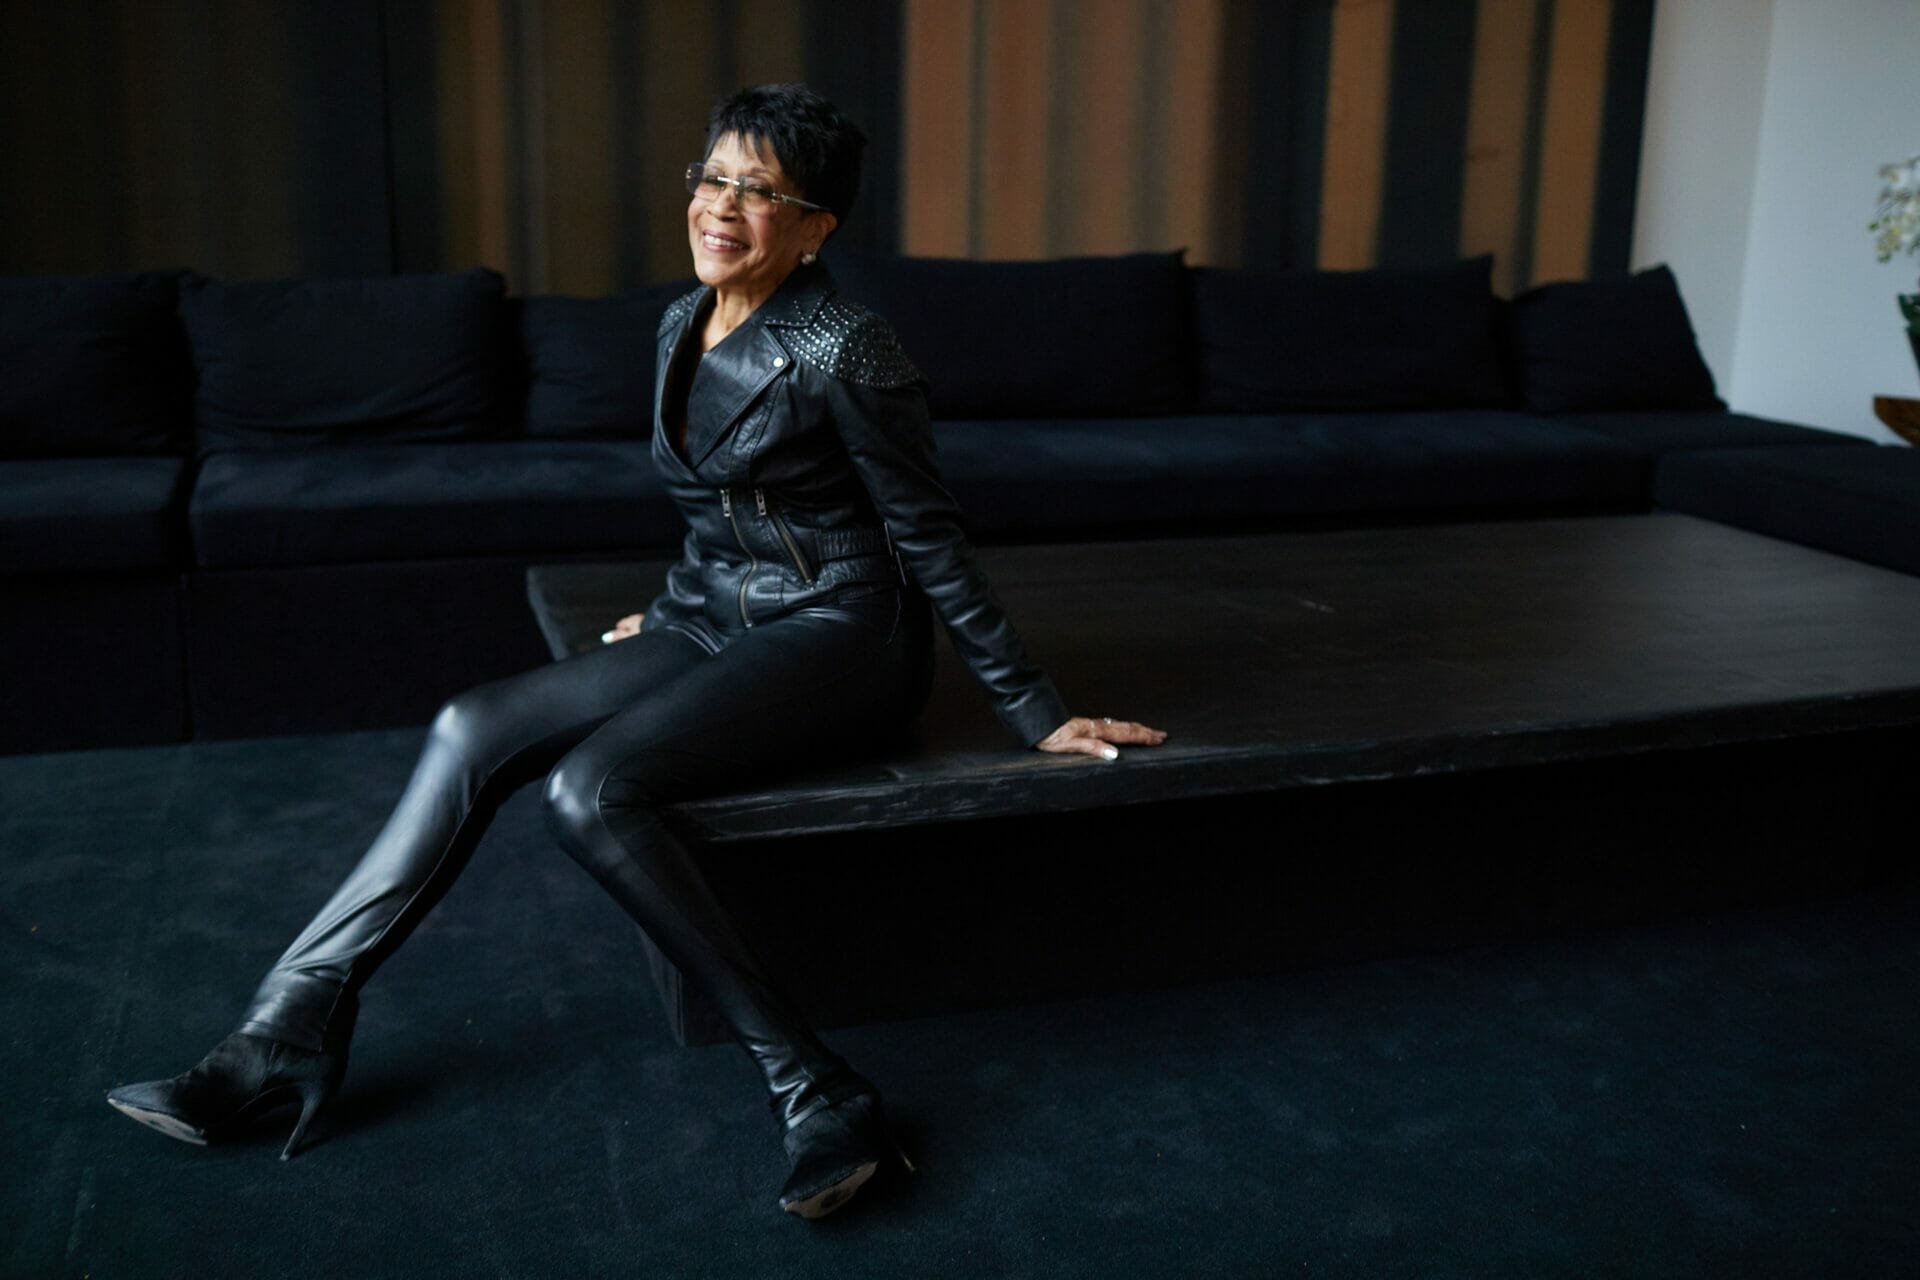 Listen Now: Bettye LaVette Shares New Single “Hard To Be A Human”